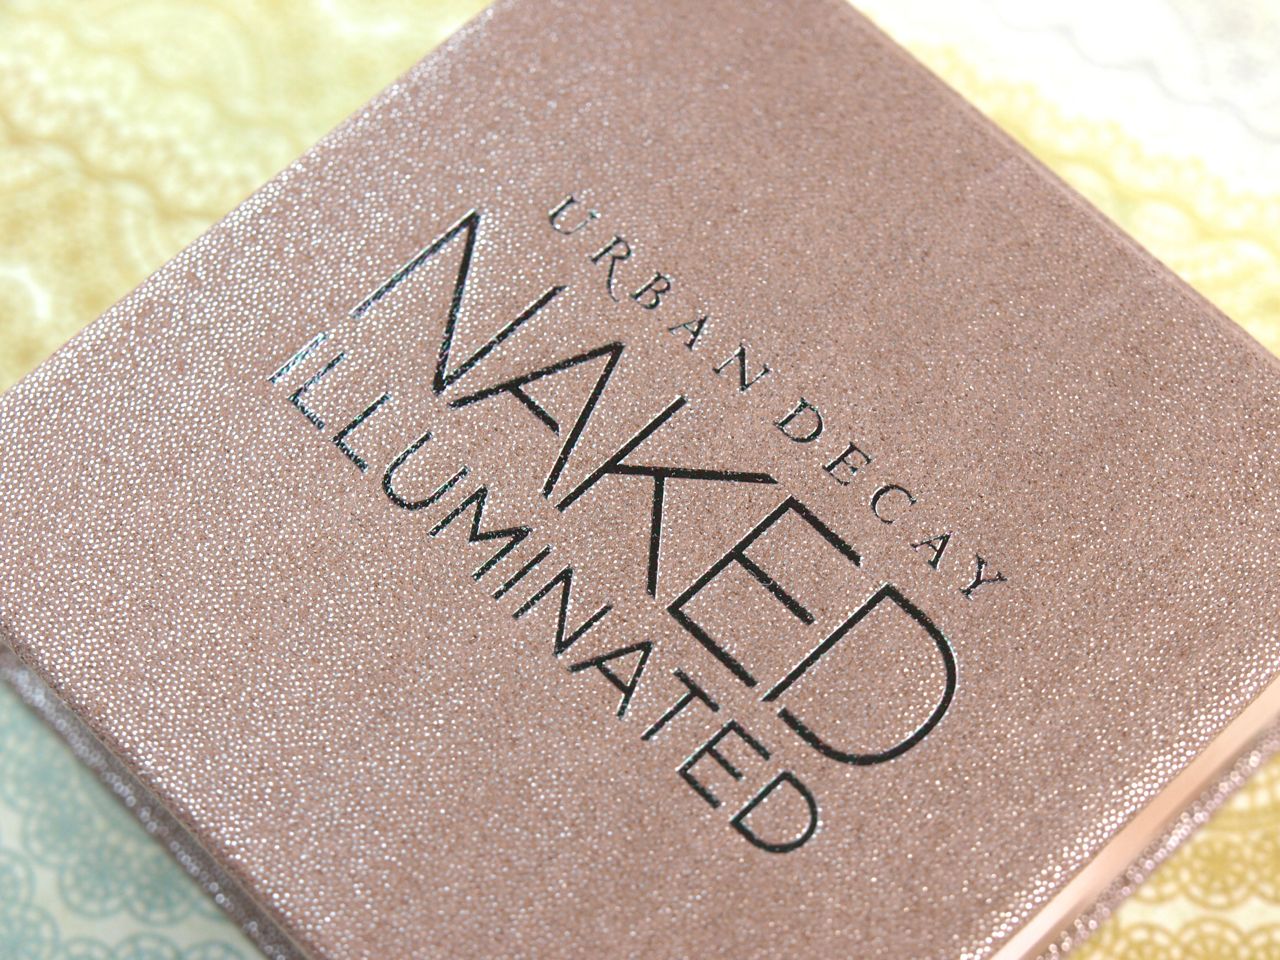 Urban Decay Naked Illuminated Highlighter in "Aura": Review and S...